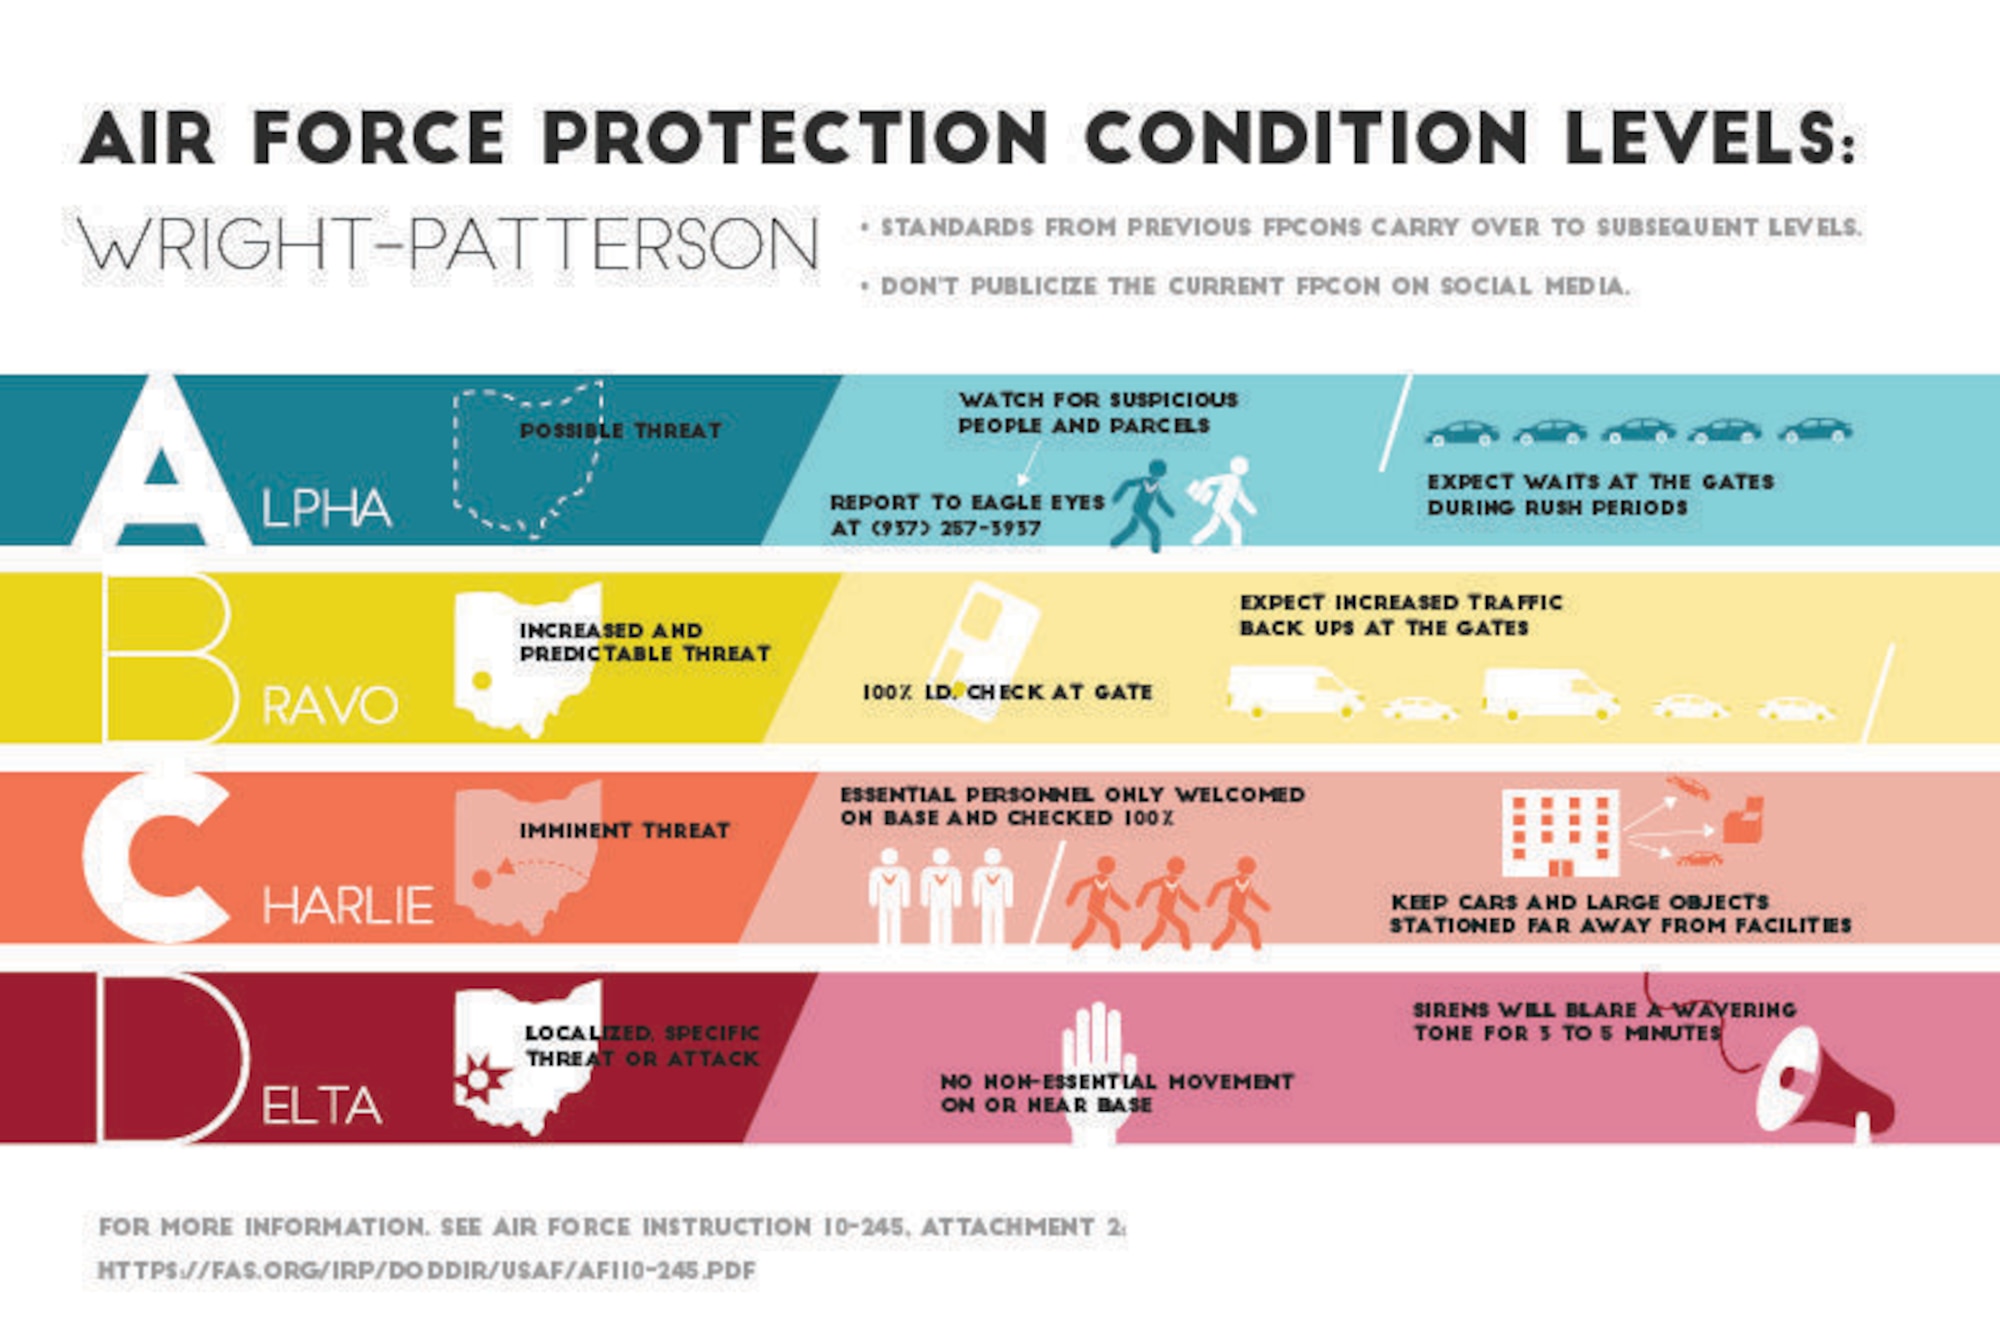 Force Protection Condition levels measure threats to an installation and prescribe specific defense procedures to mitigate the danger and protect Airmen and resources. Oftentimes, quarterly exercises will launch the base into a higher level of security, mimicking the installation-wide implications of a real-world threat. FPCON shifts are a chance for Airmen to practice patience, collaboration and readiness. Security changes affect every Airmen living or working at Wright-Patterson Air Force Base, and knowing what to expect will help all carry out their duties during both real and simulated threats. (U.S. Air Force graphic/Caroline Clauson)